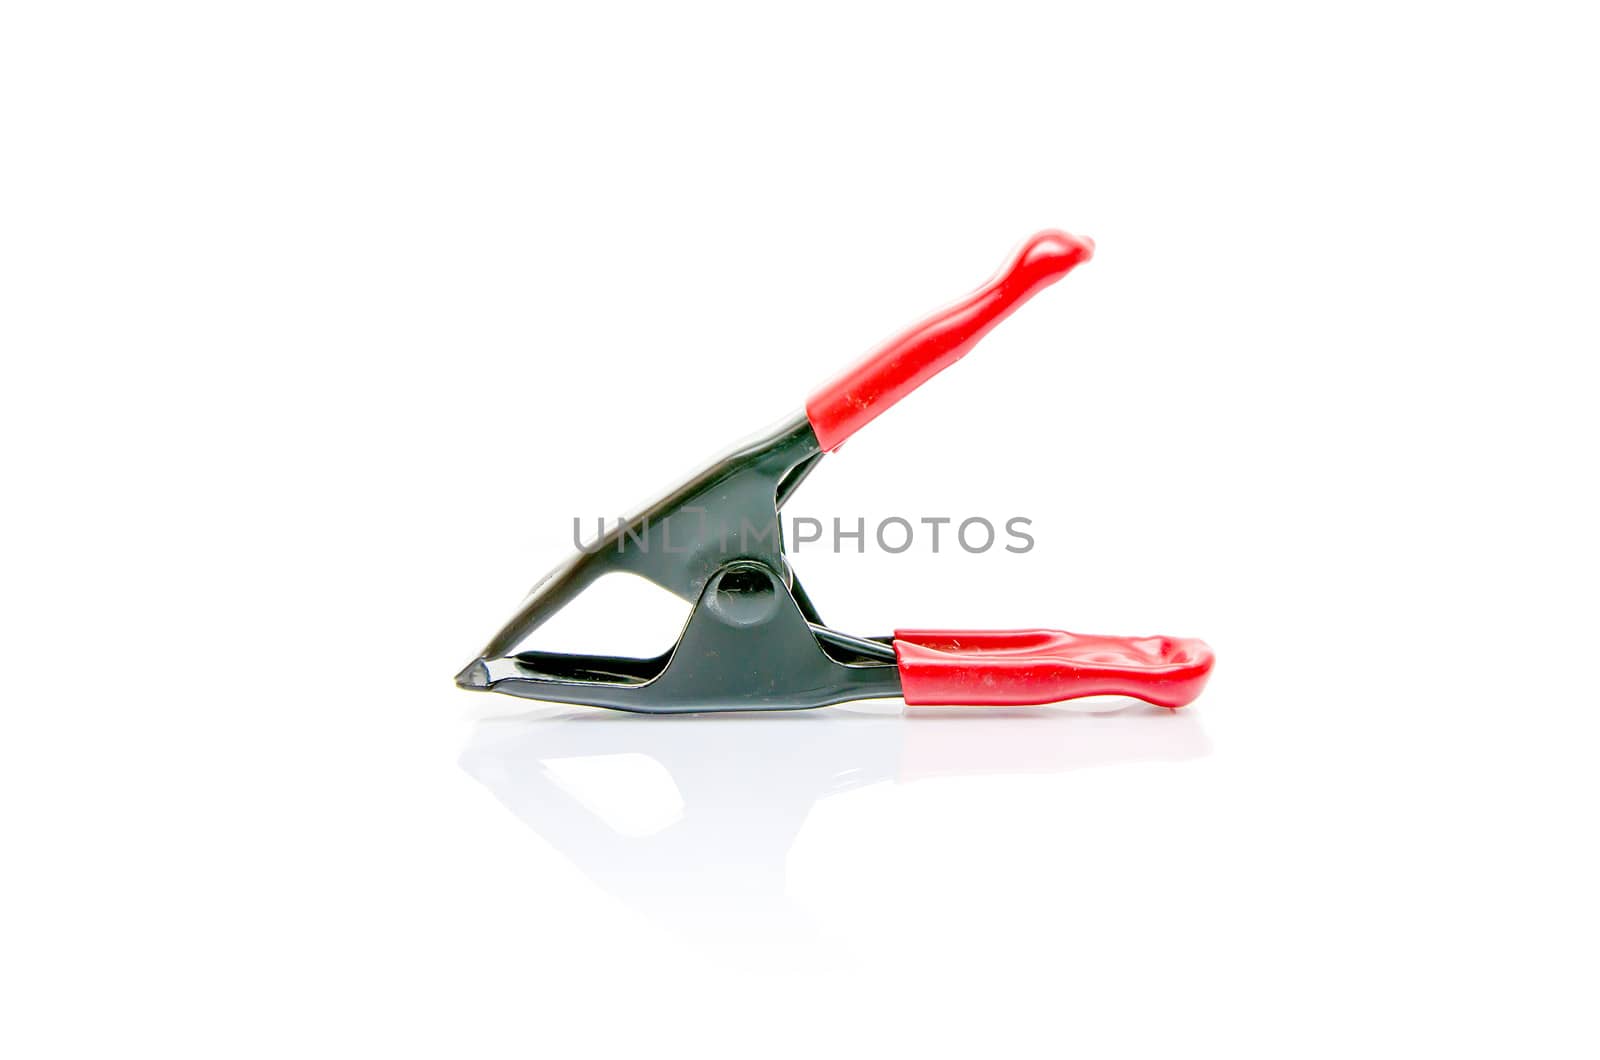 Isolated Electronic Plier, Steel Tools